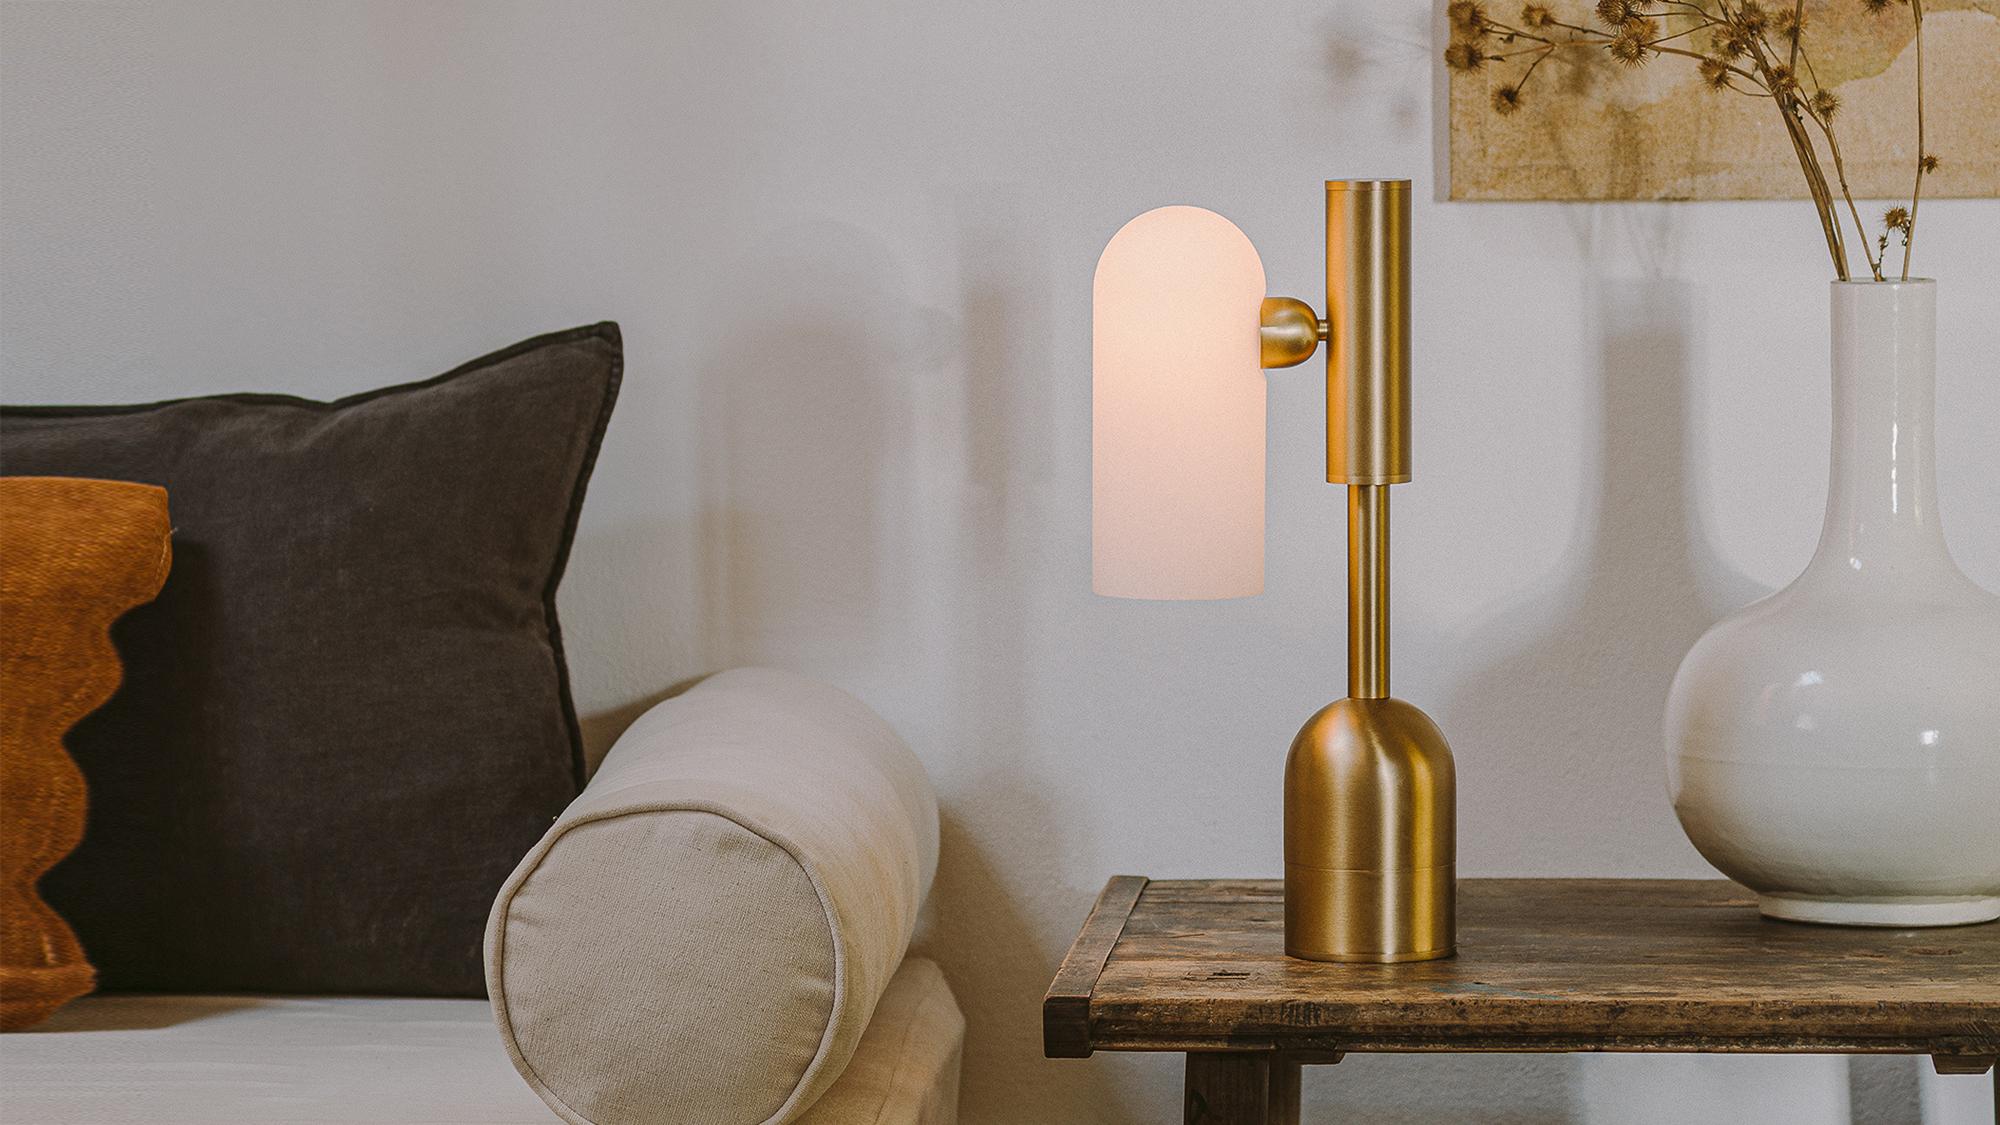 A guiding light is a powerful tool and a seductive force. The sturdy base of this table lamp ensures a stable instrument. At a personal scale the resolute frosted shades provide a calming illumination.

Available in our three signature finishes: